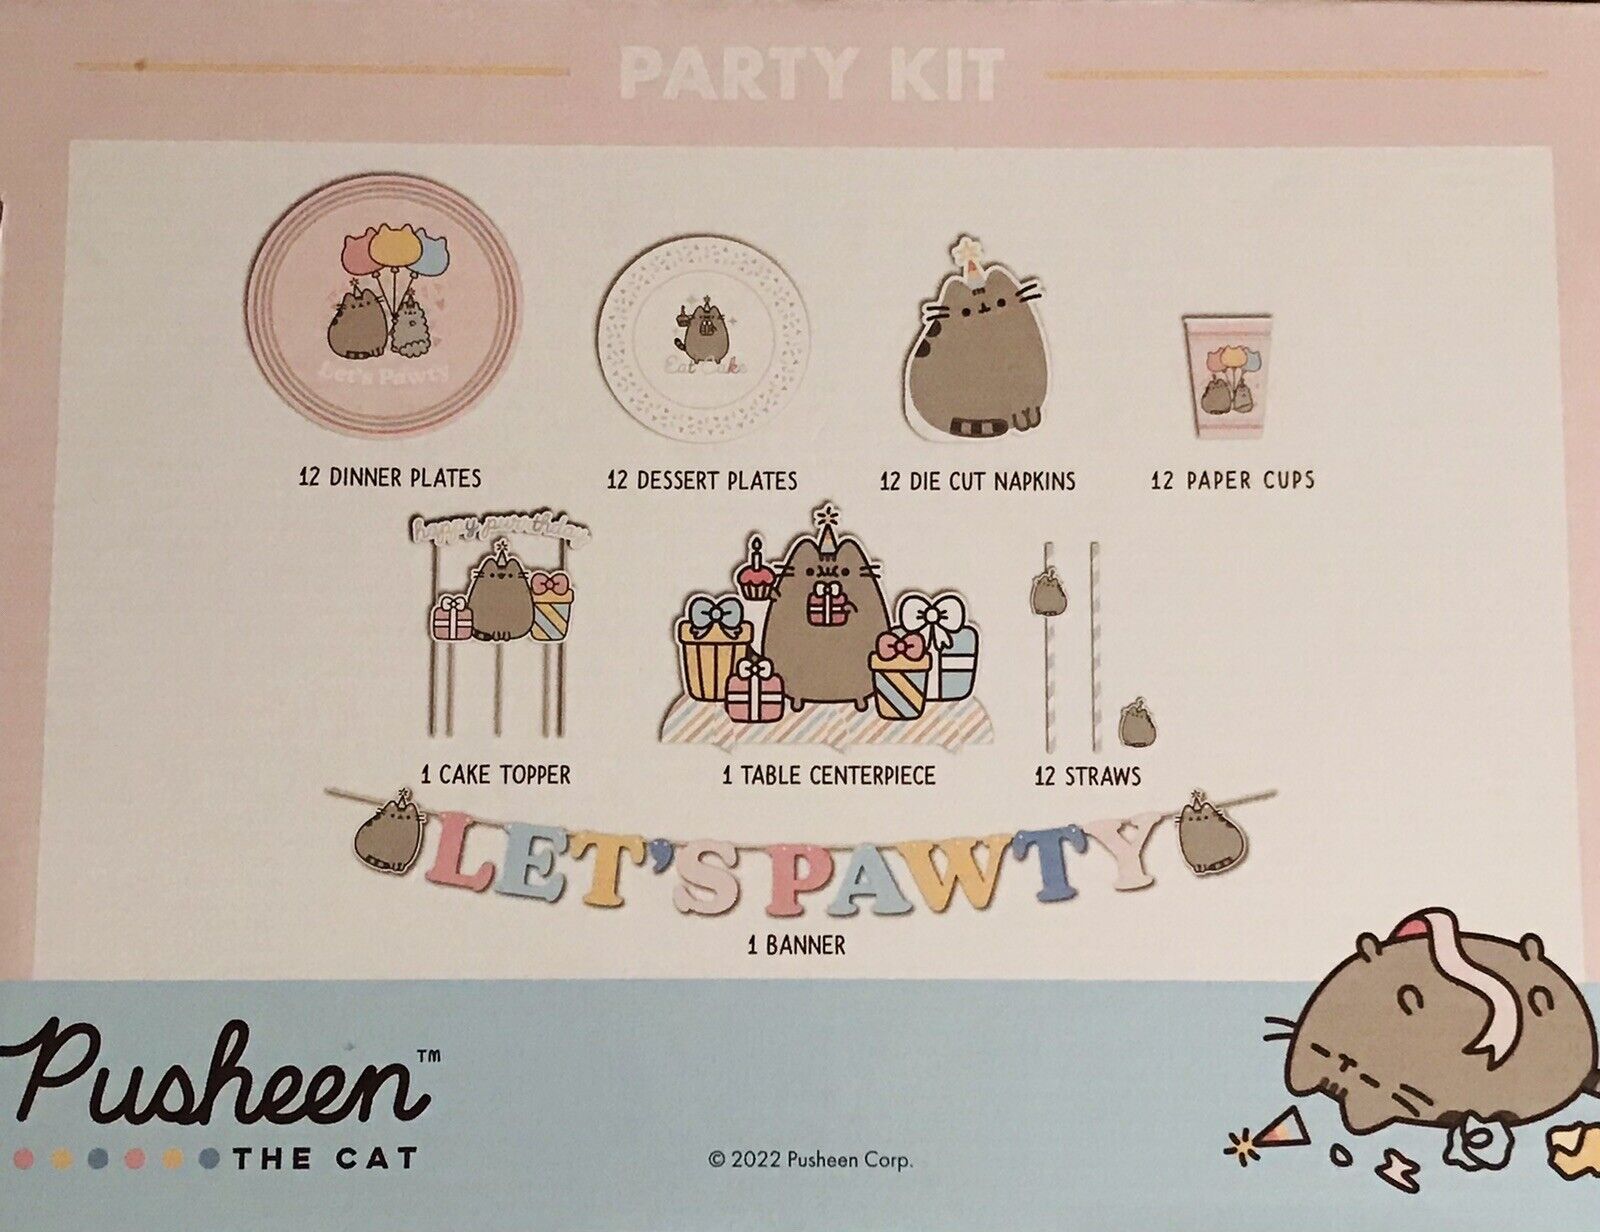 Pusheen The Cat “Let’s Pawty” 2022 Pusheen Corp Party Kit Celebrate Any Occasion